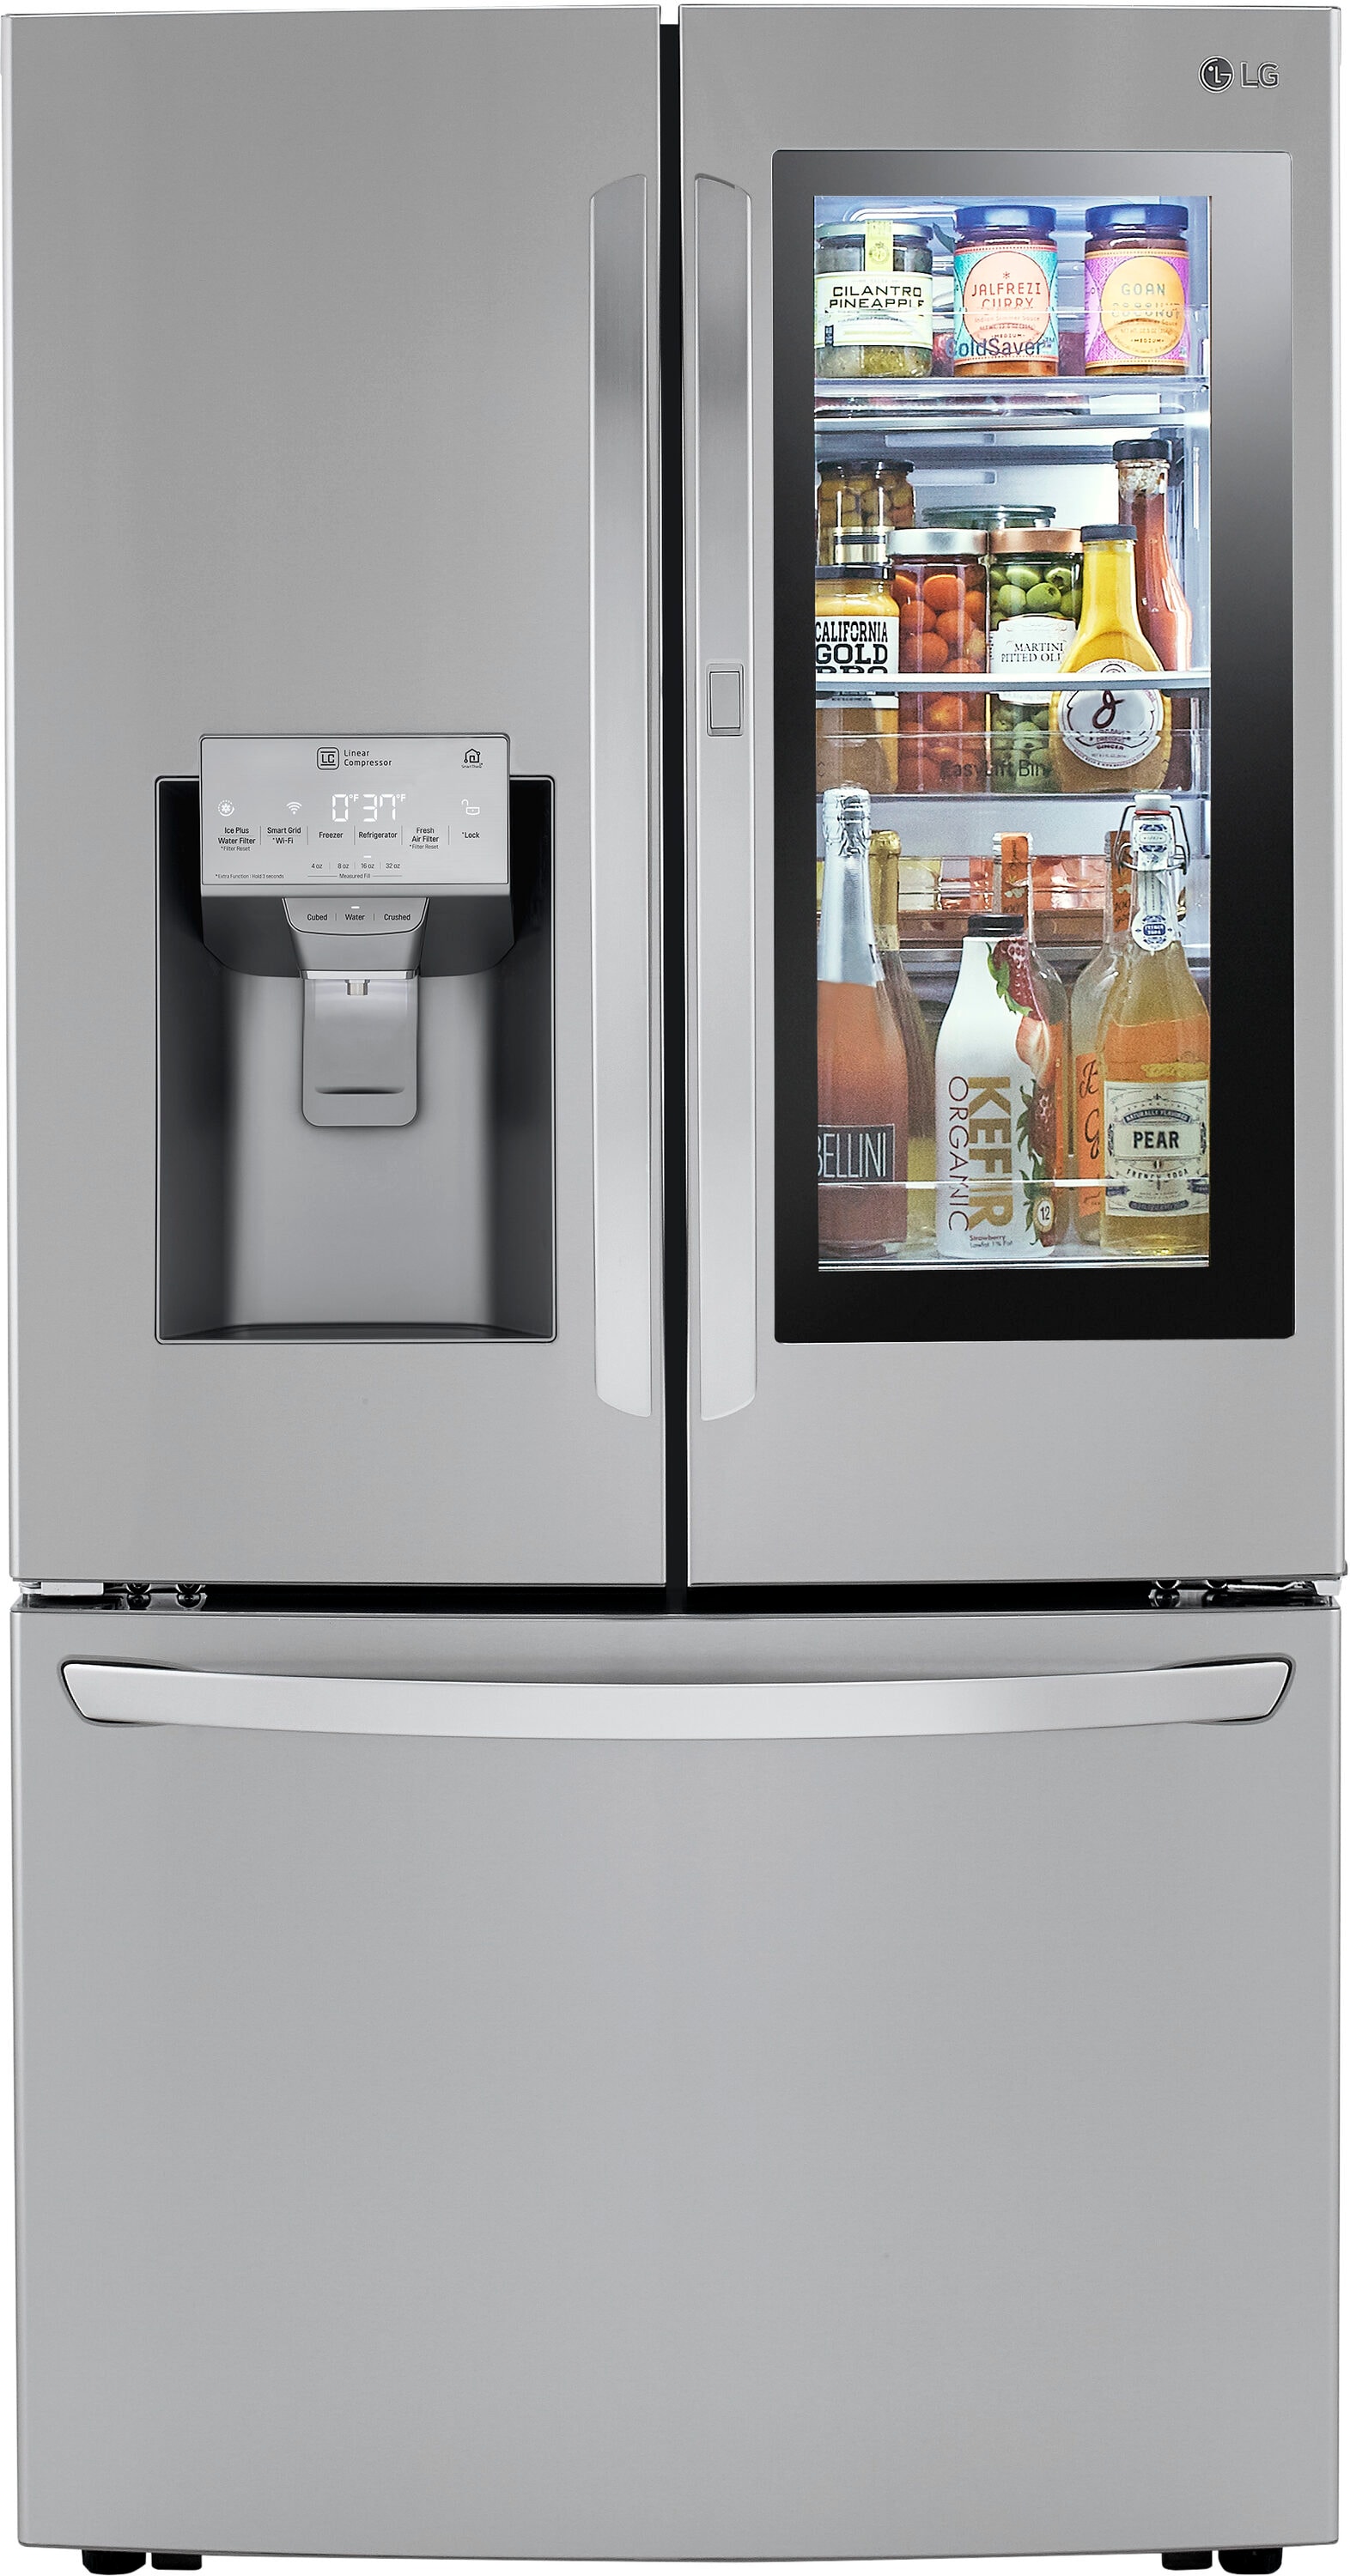 LG Introduces Air Fry and Knock-On InstaView Technology to